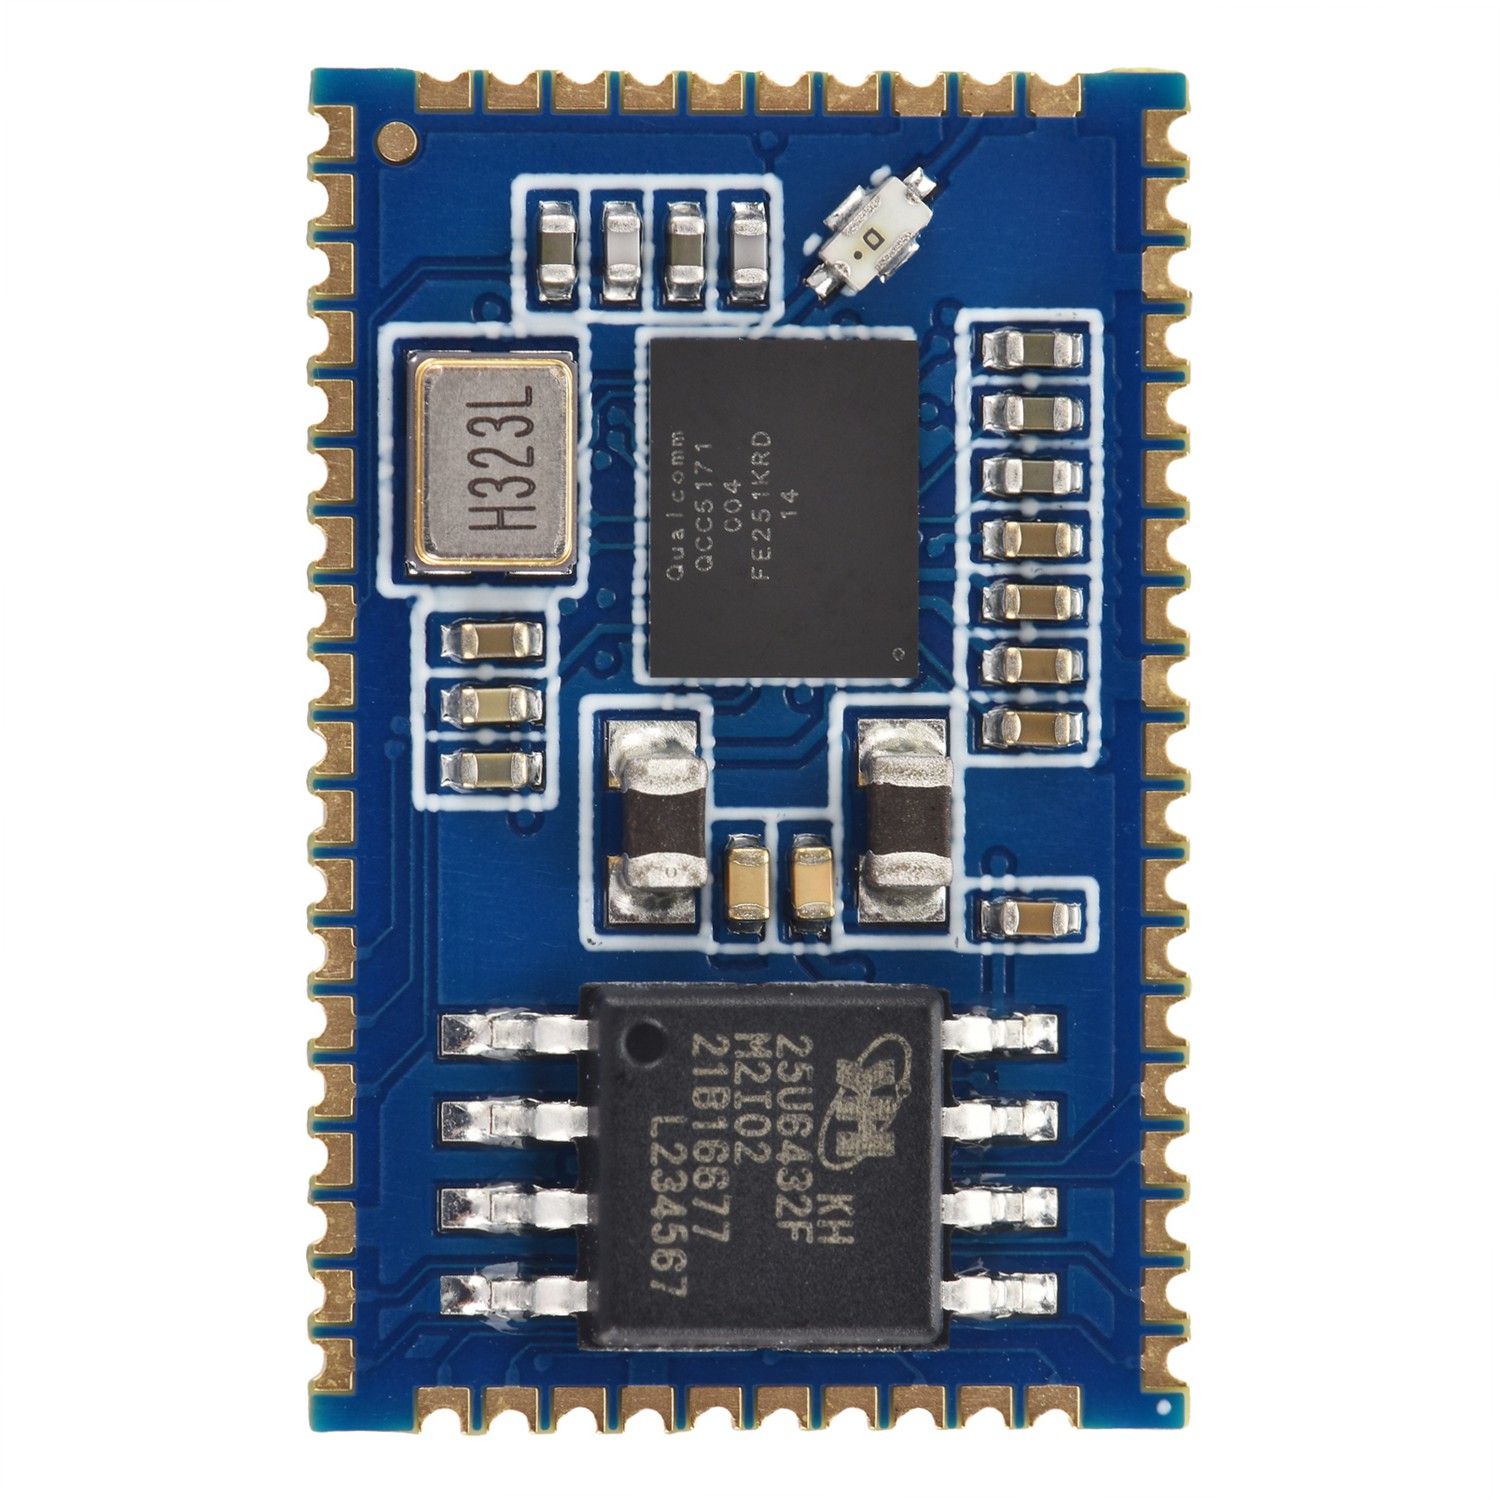 Introduction to BTM571 (QCC5171) Bluetooth module